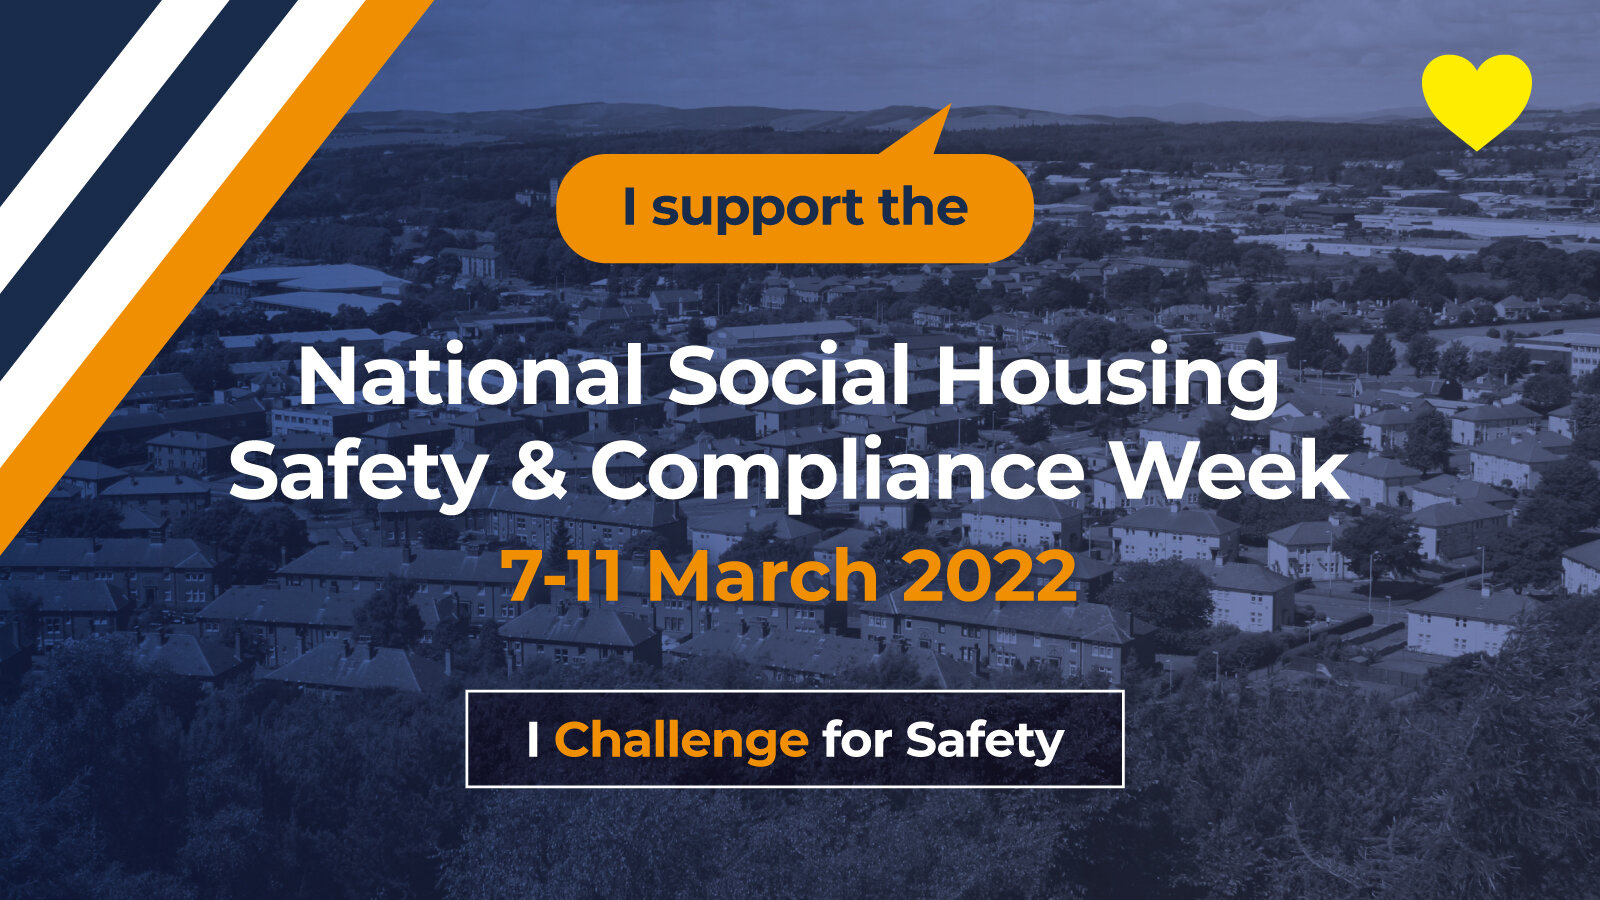 National Social Housing Safety & Compliance Week 2022